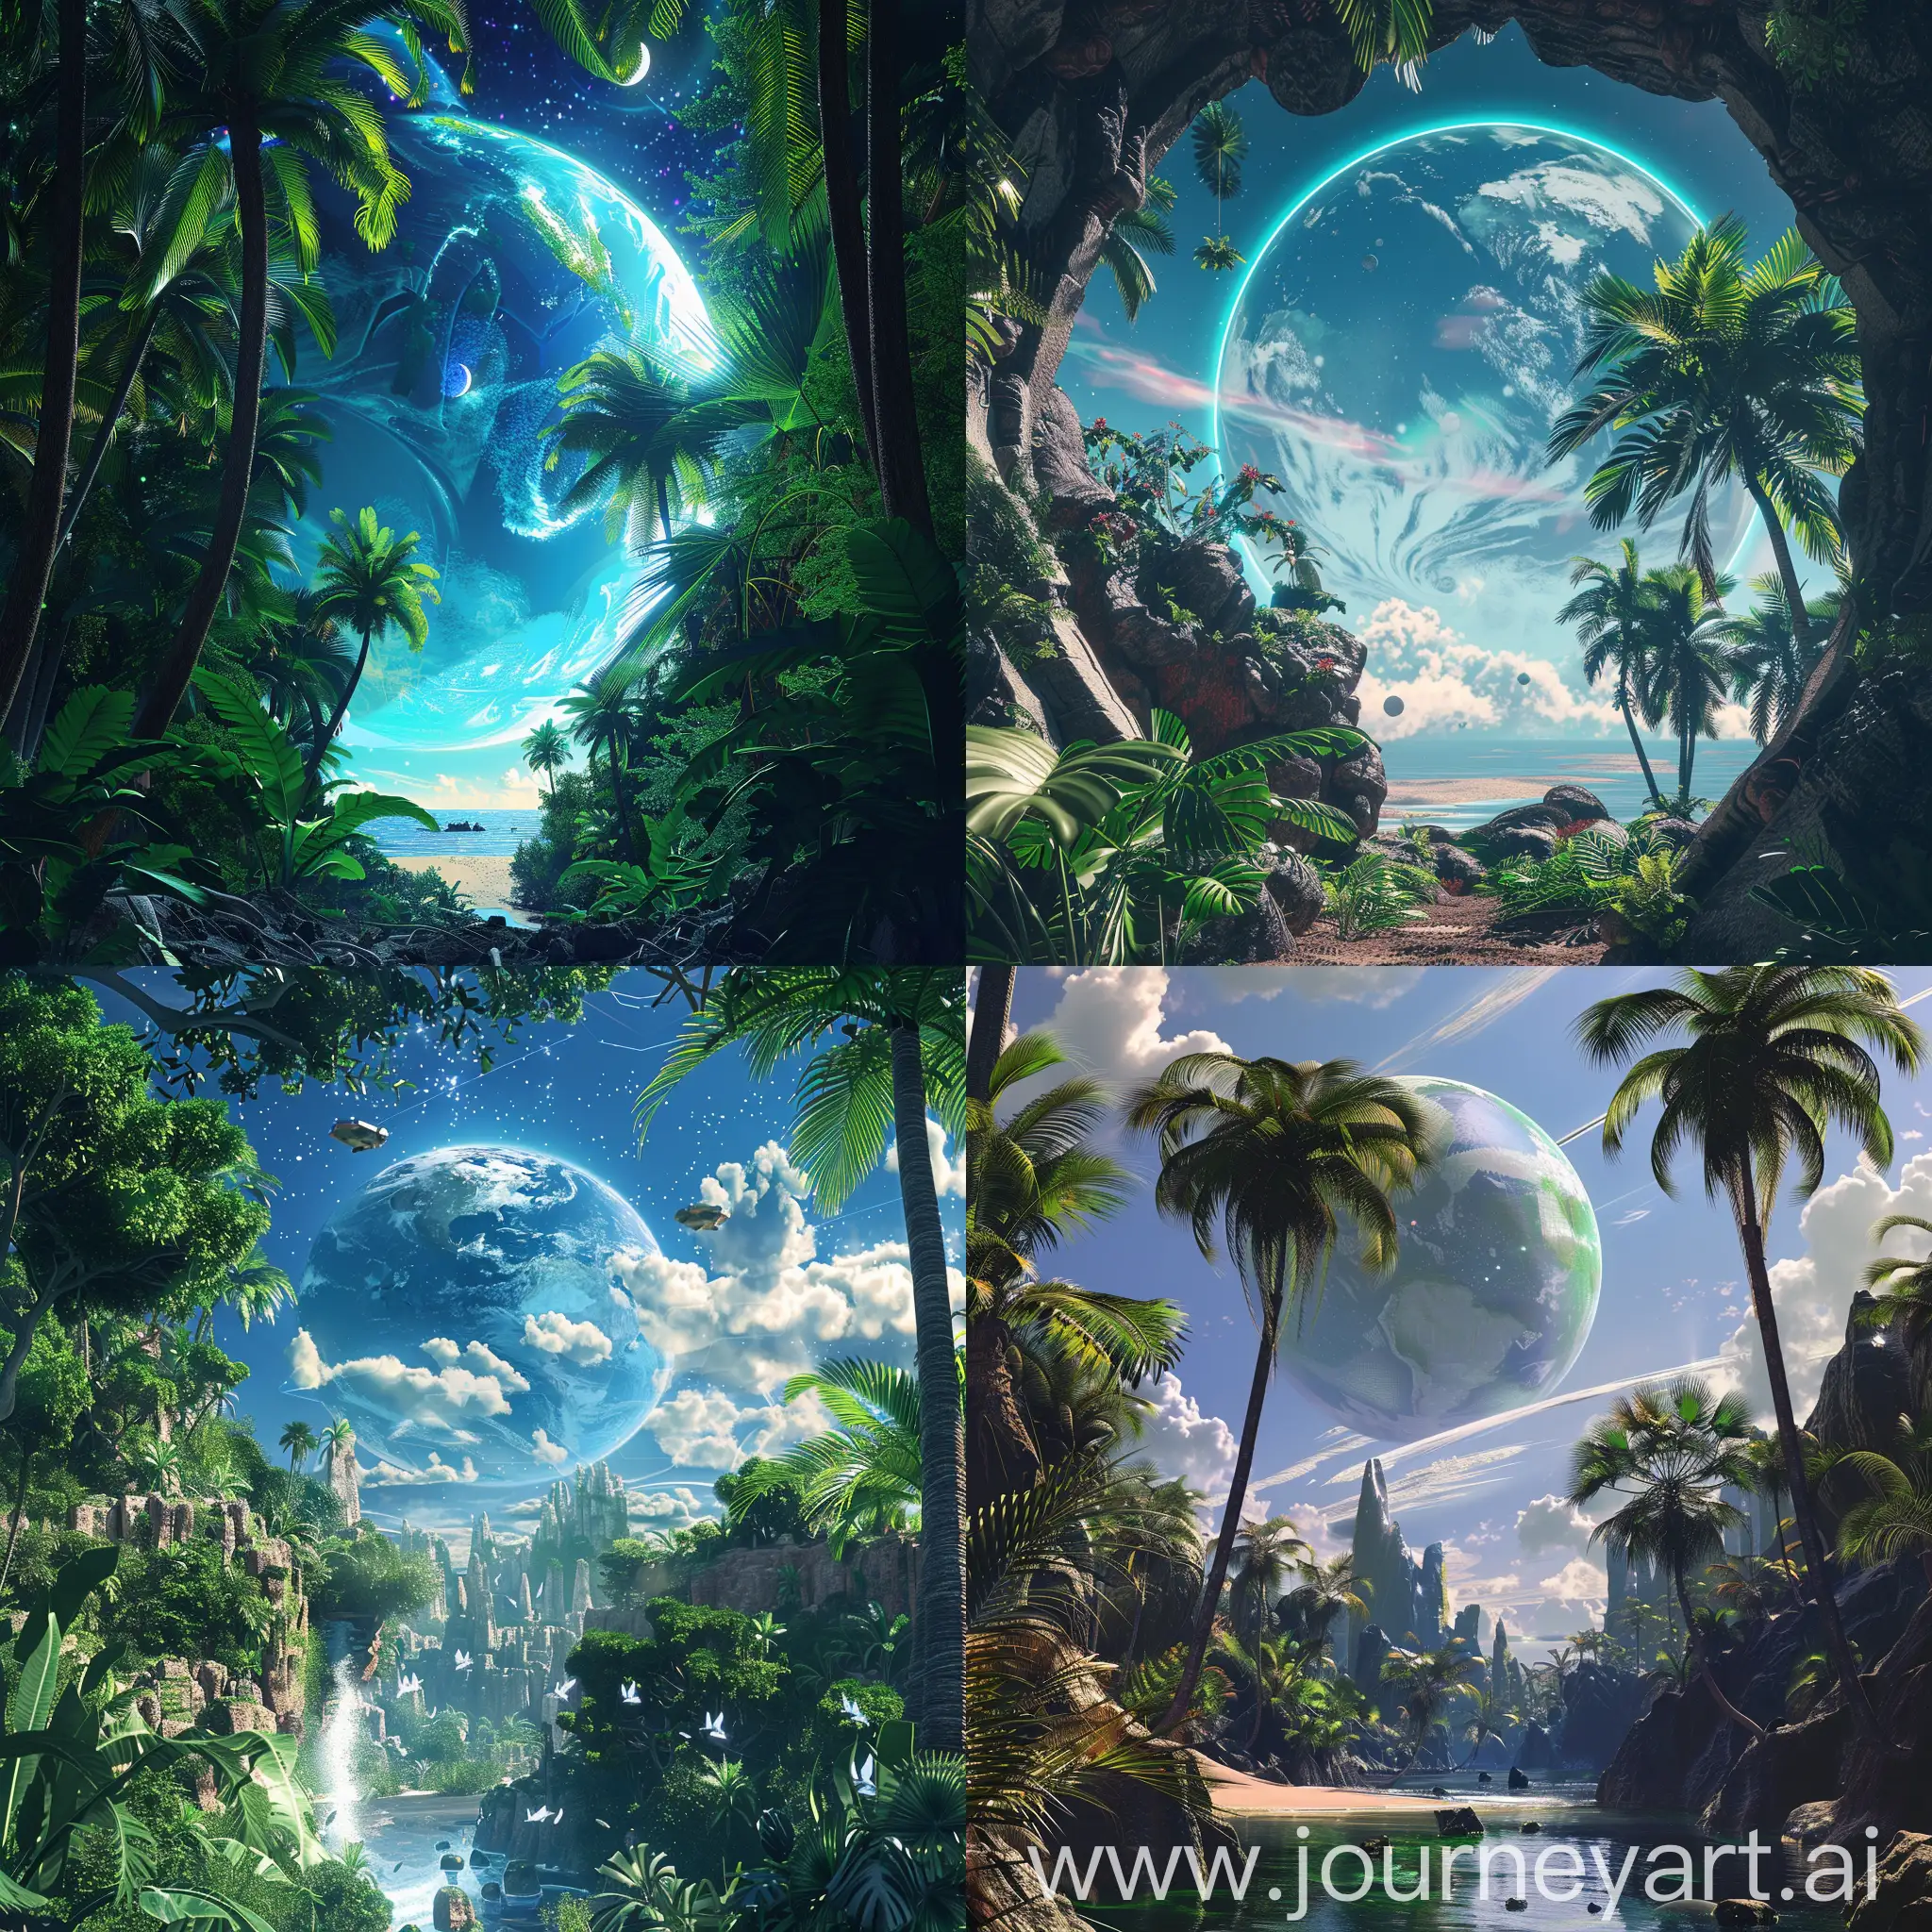 Tropical-Paradise-at-Uran-with-Sky-View-of-Planet-Earth-in-Cyberpunk-Style